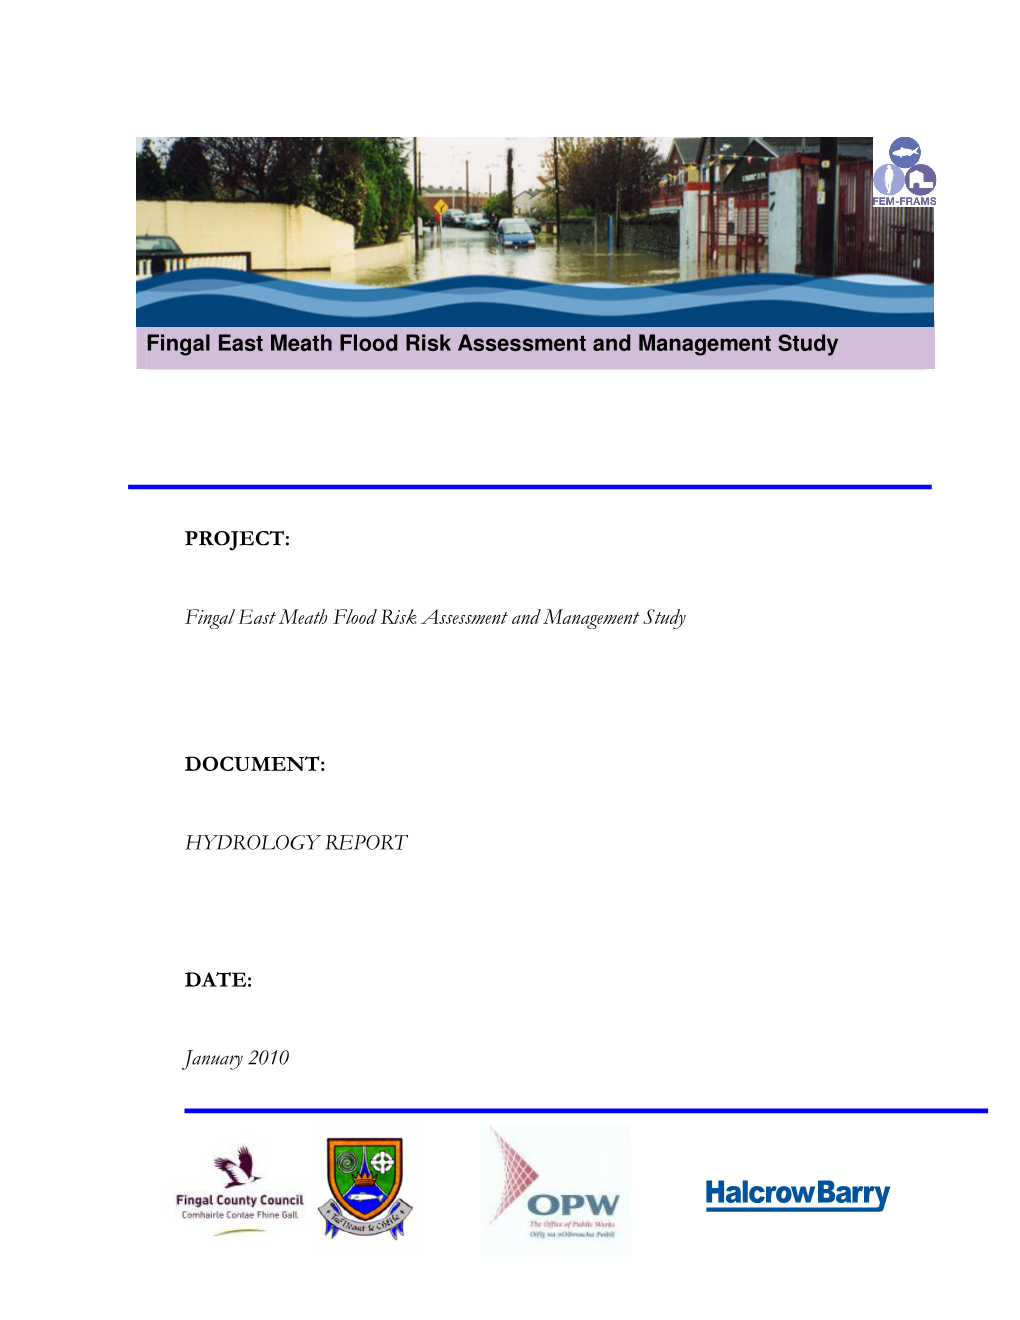 Hydrology Report Date